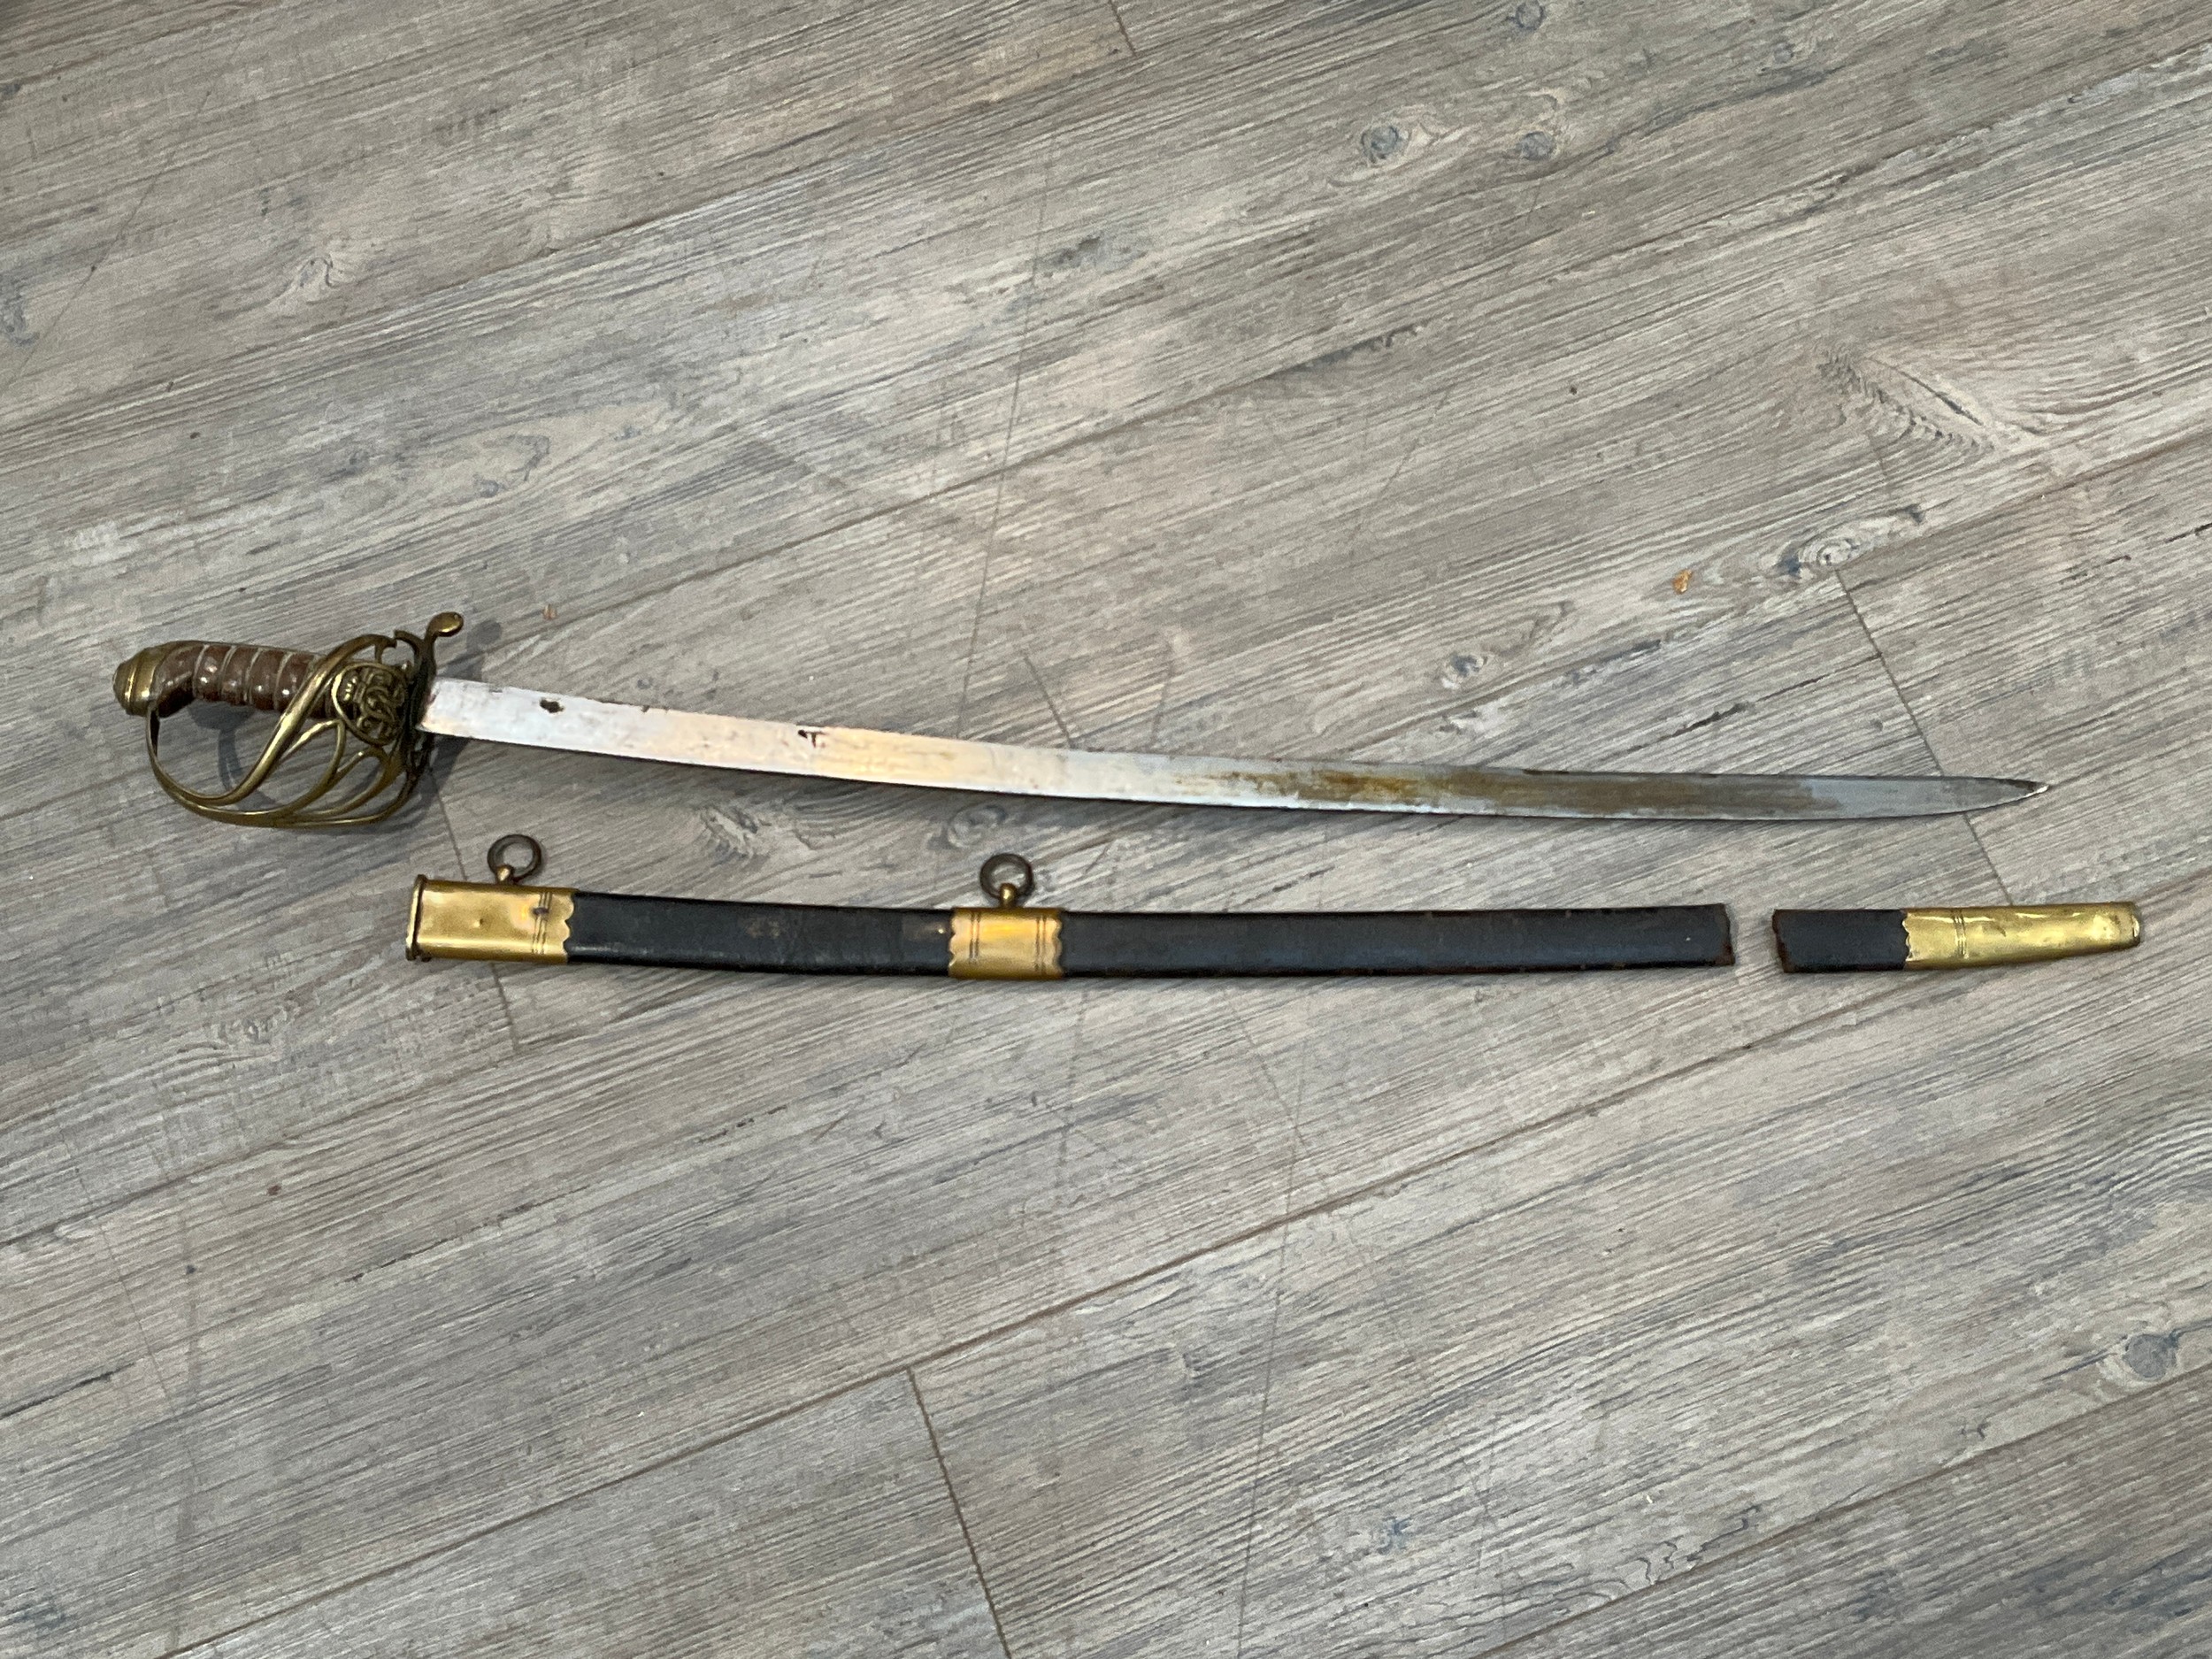 DAVID RUSHE V.C. INTEREST: An 1822 pattern Victorian officer's sword with plain blade double-edged